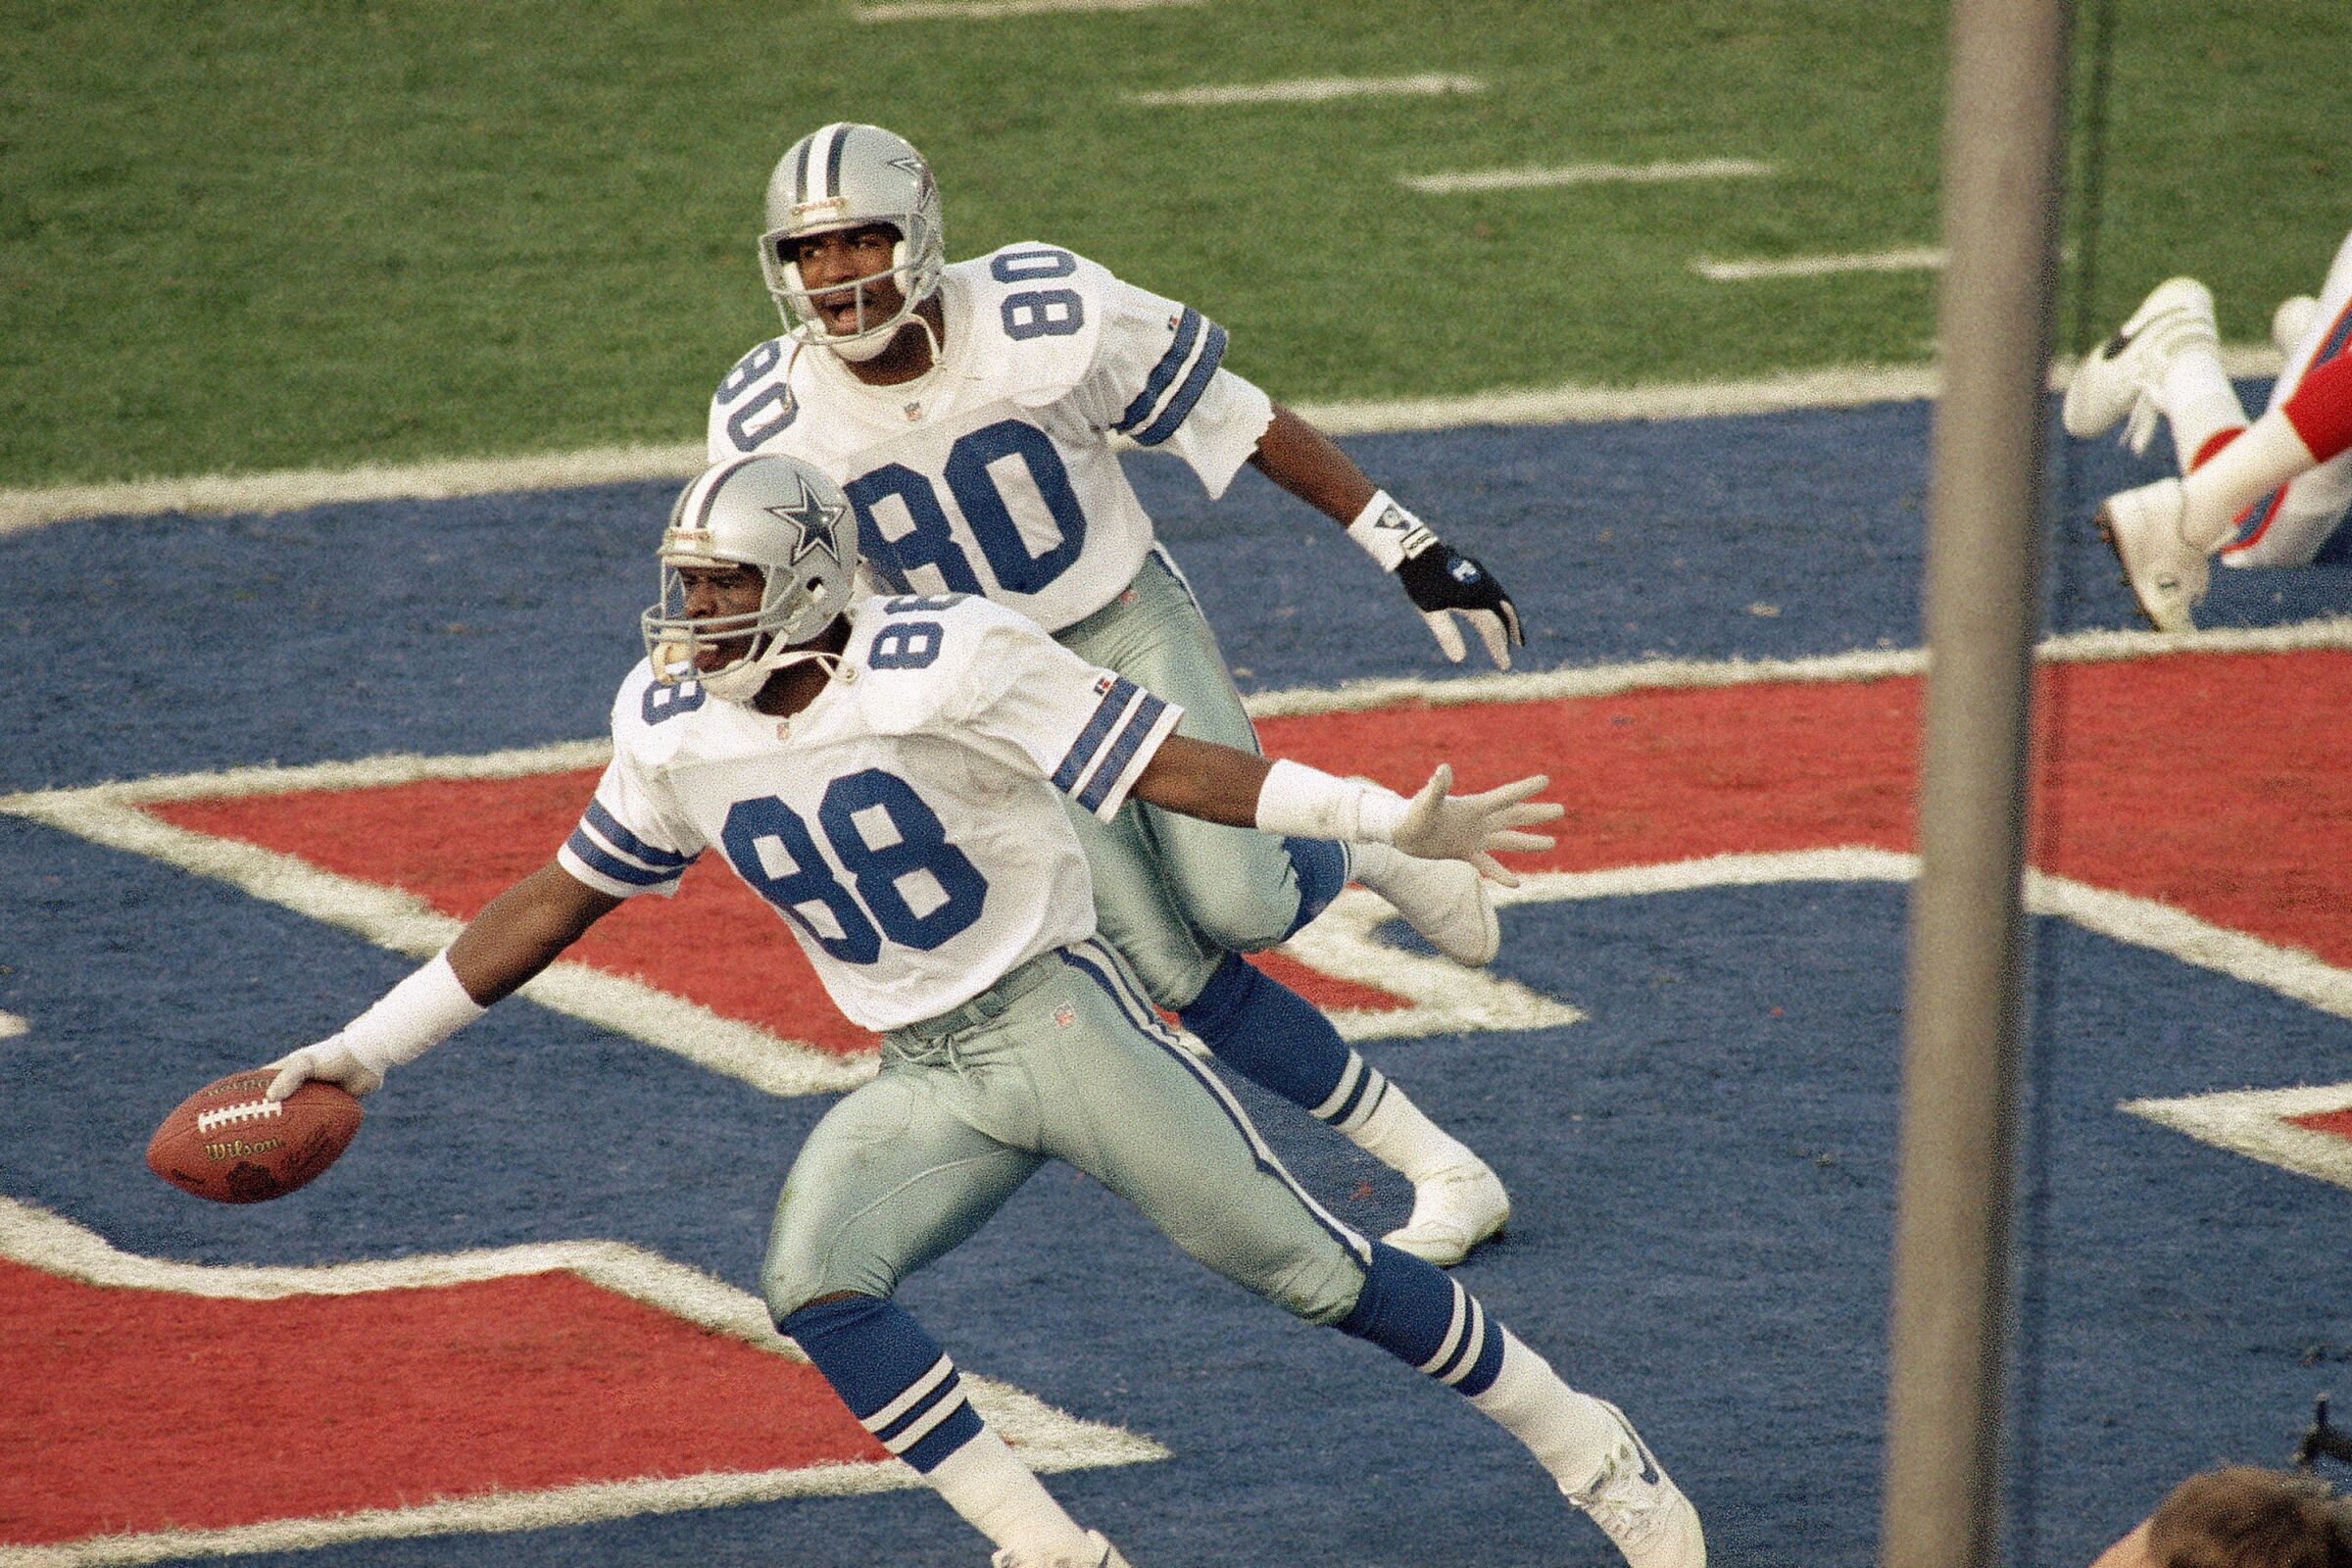 Dallas Cowboys Michael Irvin spreads his arms in celebration in the end zone as teammate Alvin Harper runs behind him.